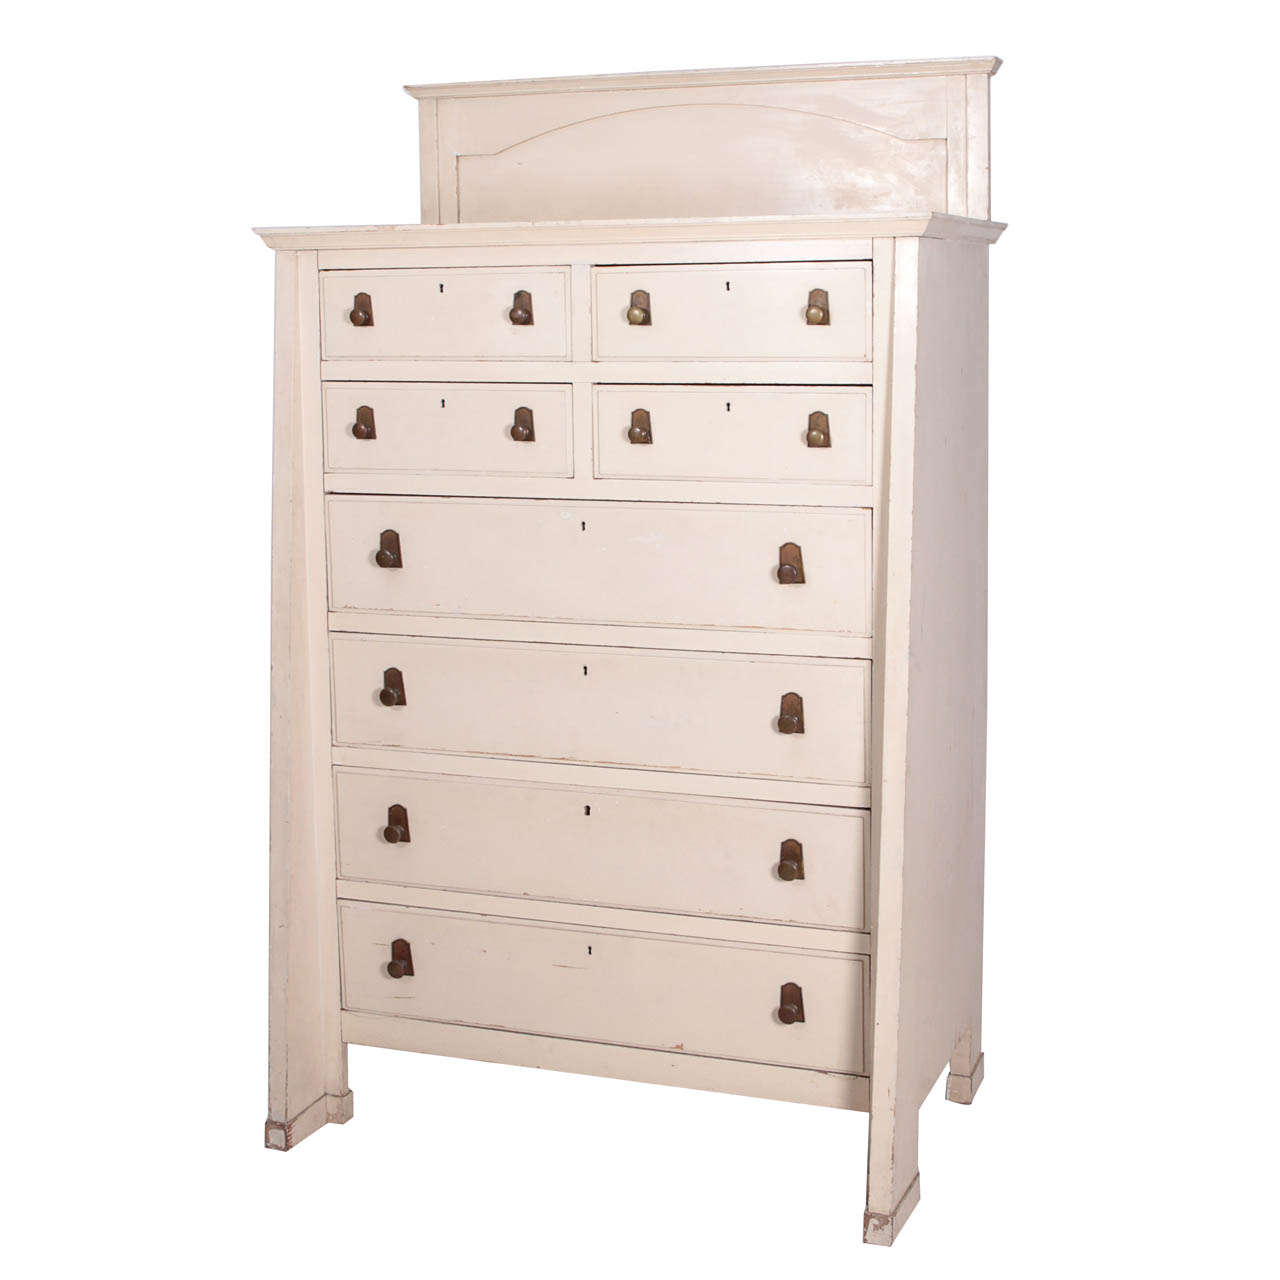 George Washington Maher "Rockledge" American Arts & Crafts tall chest of drawers 1911-12 For Sale